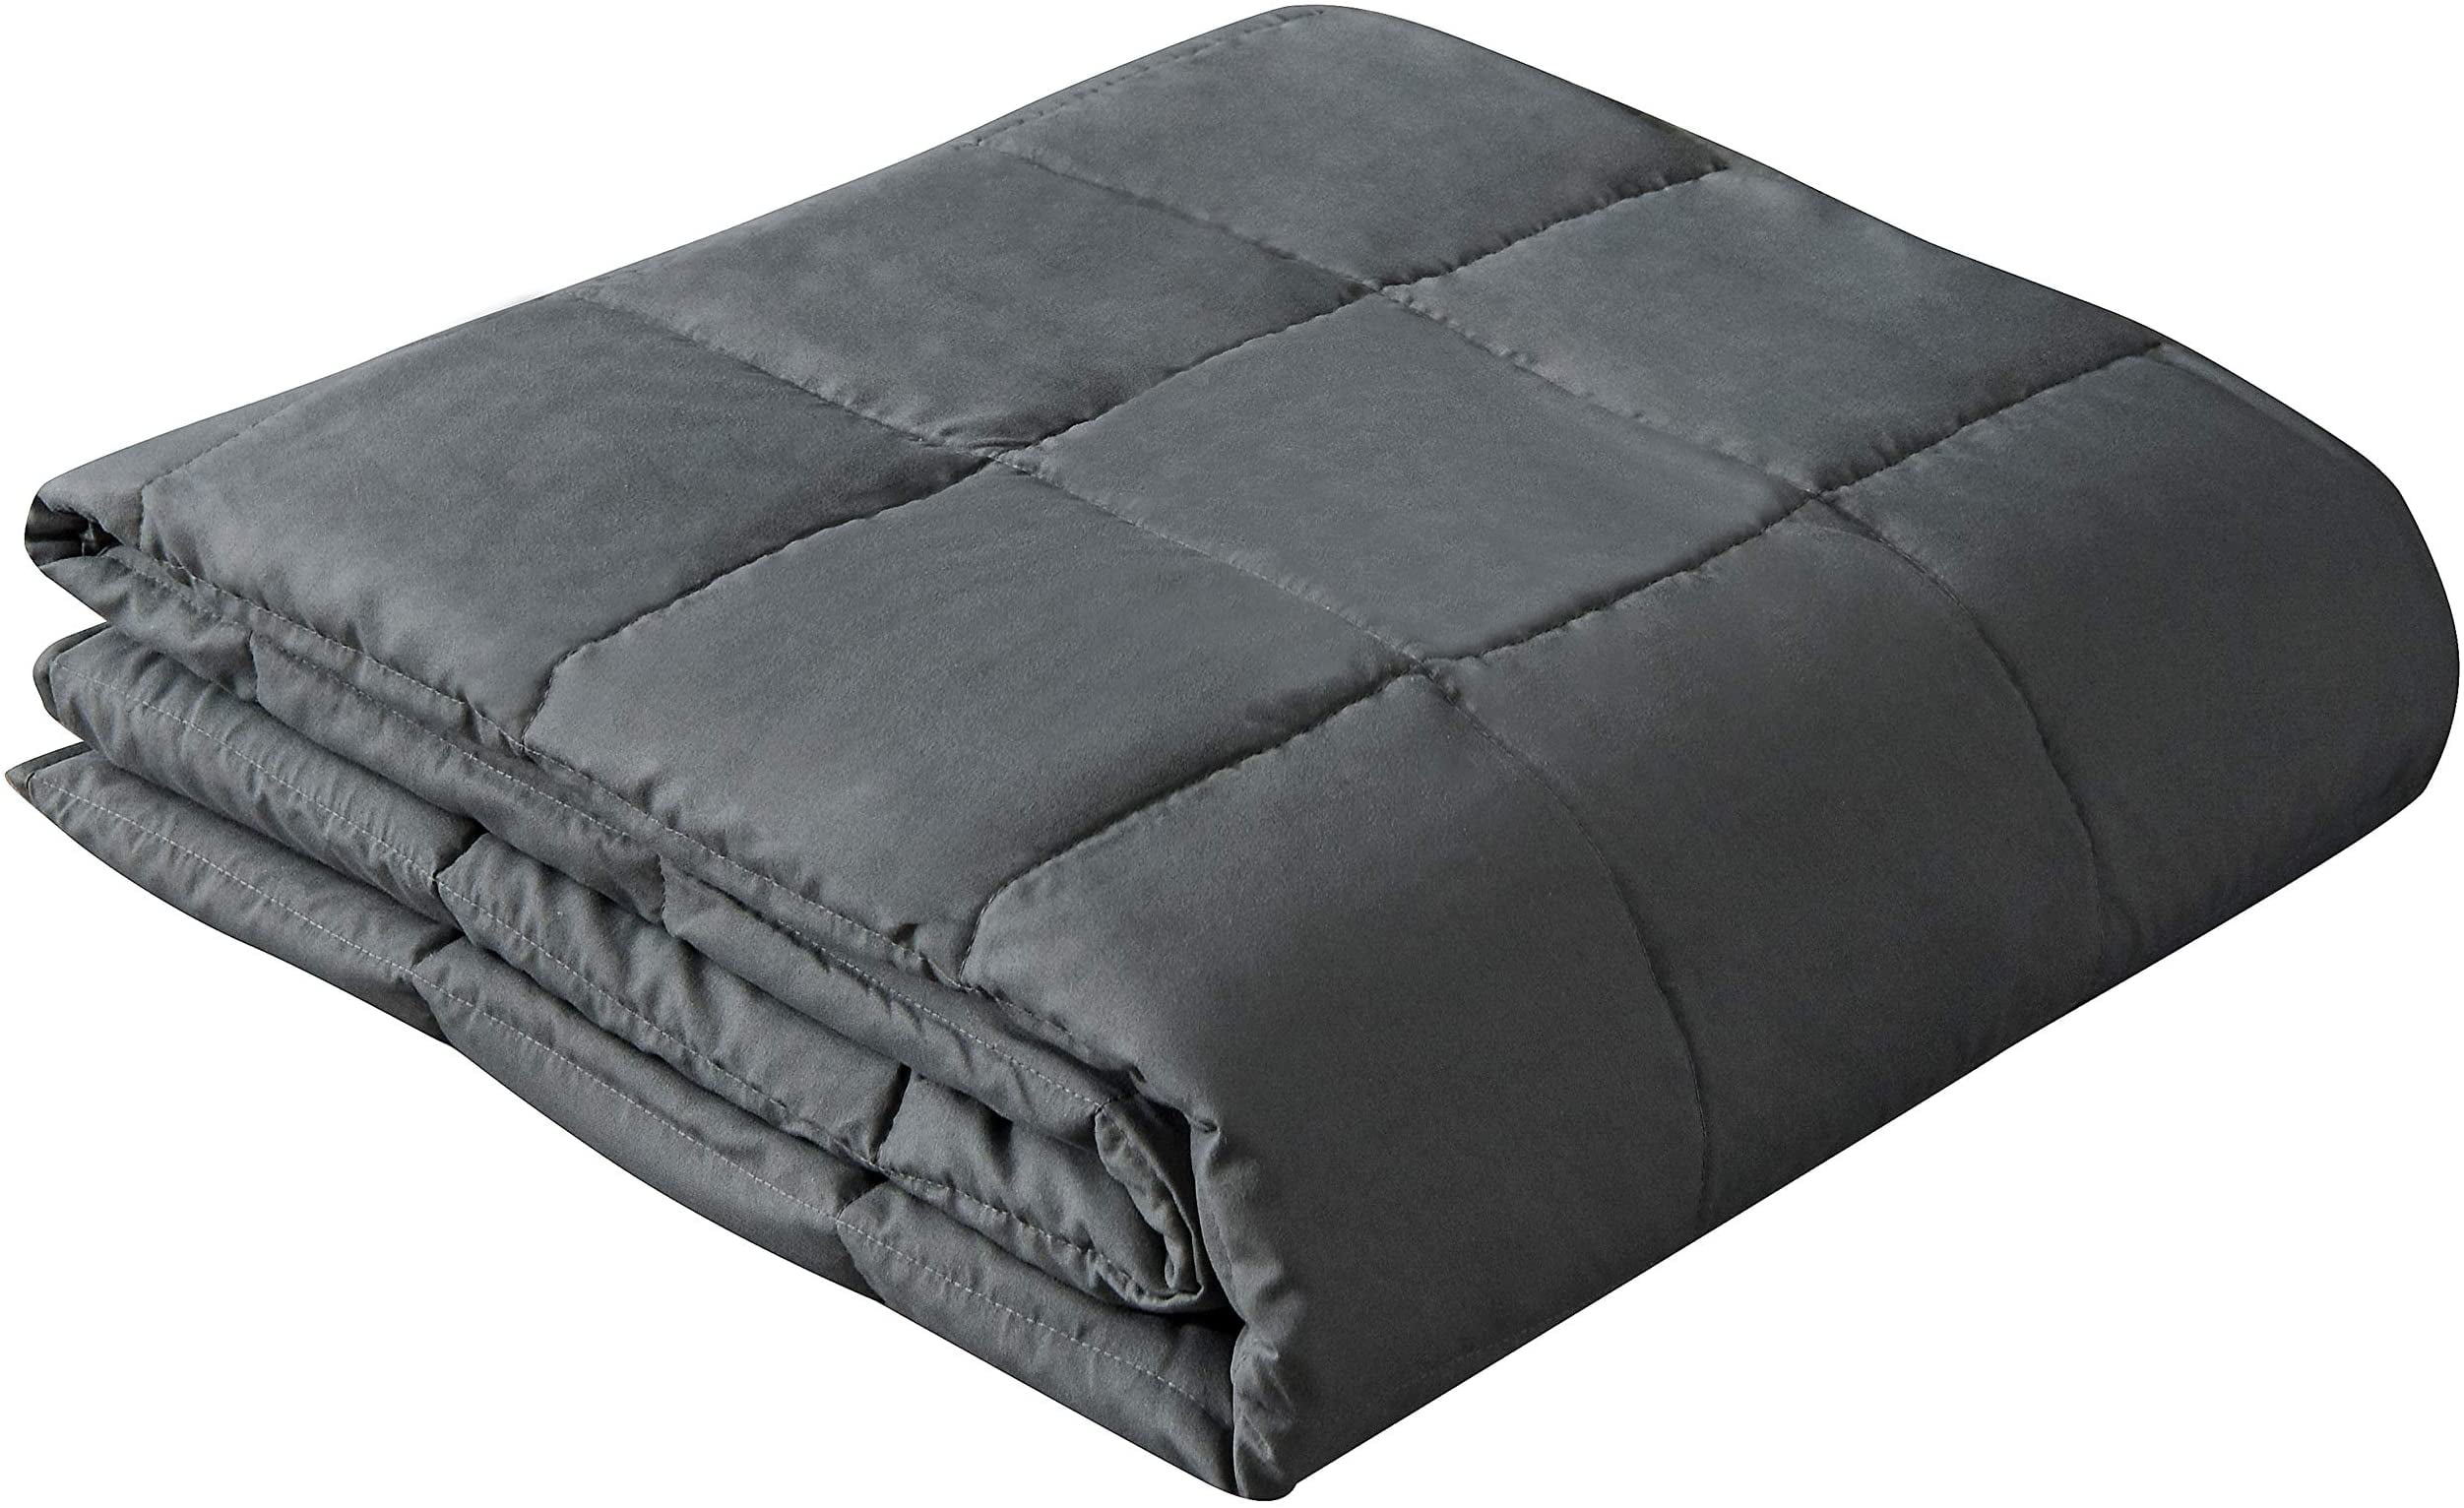 Ltd. Bamboo Duvet Cover Spearmint ZonLi Removable Duvet Cover for Weighted Blanket 55x82 Hangzhou Gravity Industrial Co 